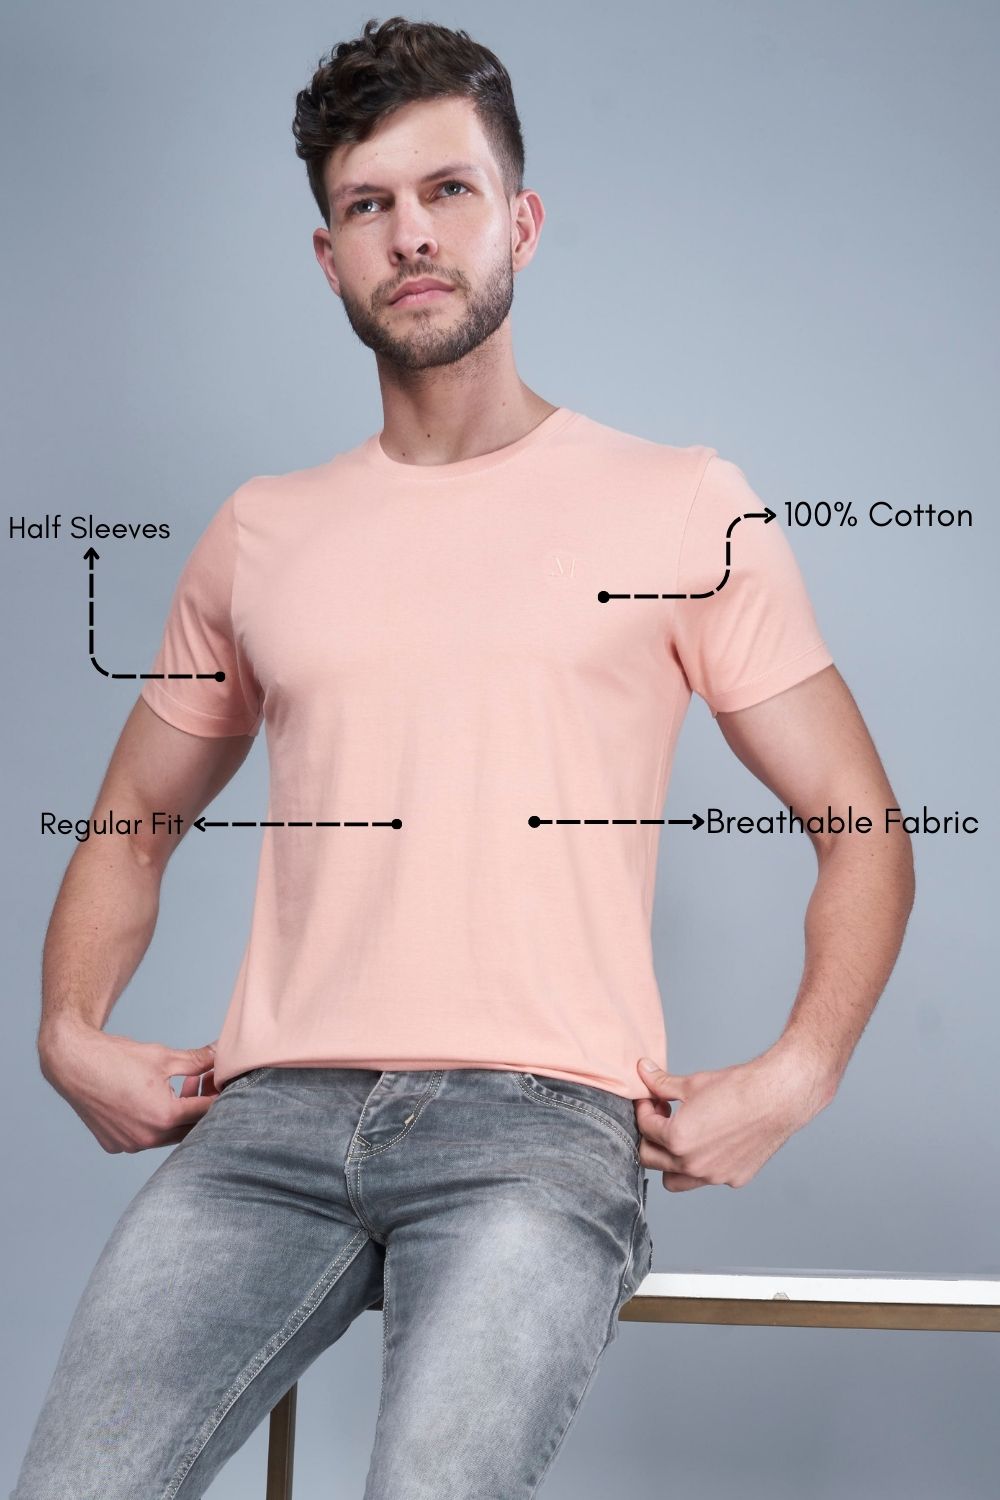 Light orange colored, Solid T shirt for men, with half sleeves and round neck, product features.